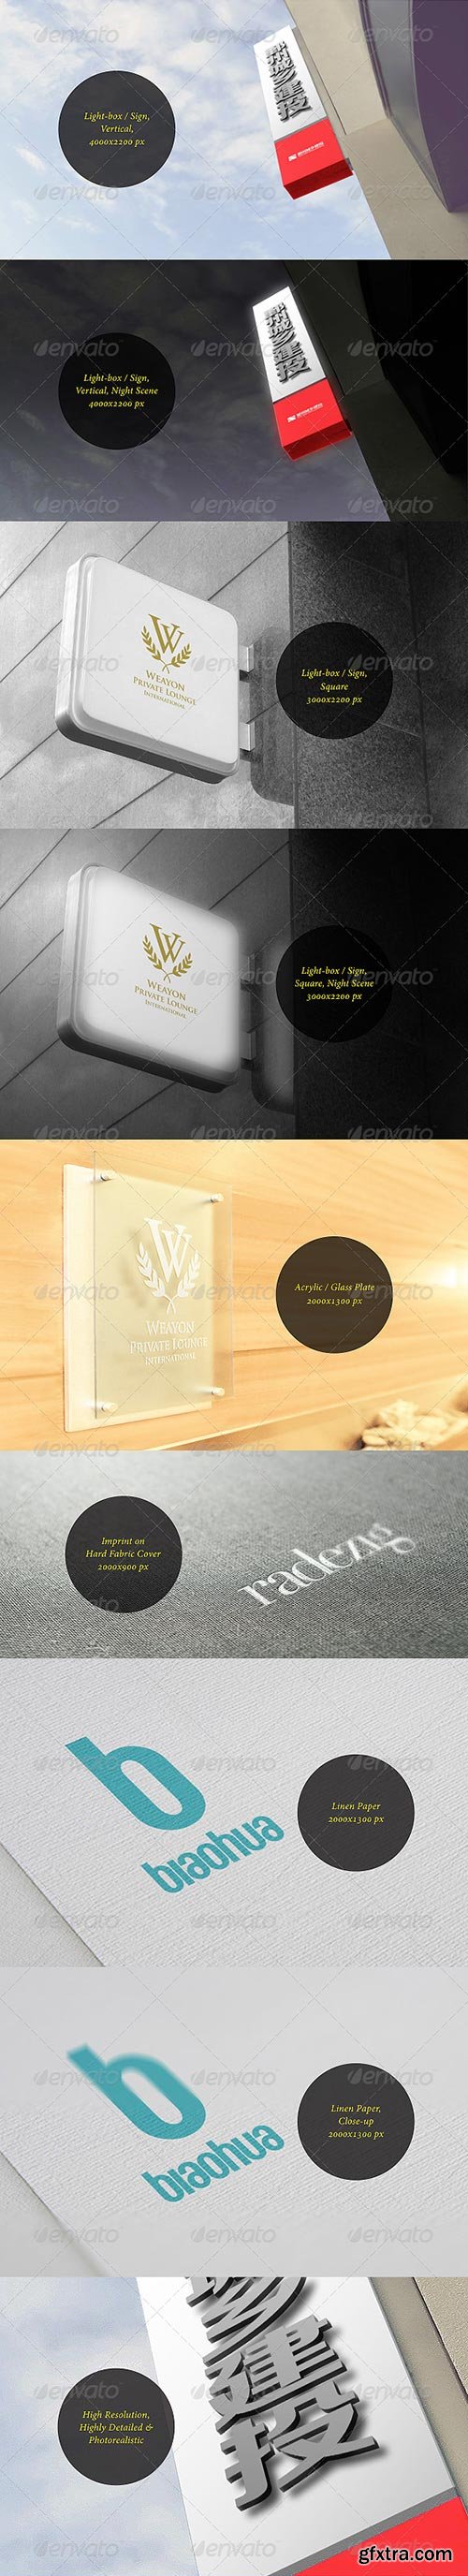 GraphicRiver - 5 Unique Photorealistic Logo Display Mock-up Pack